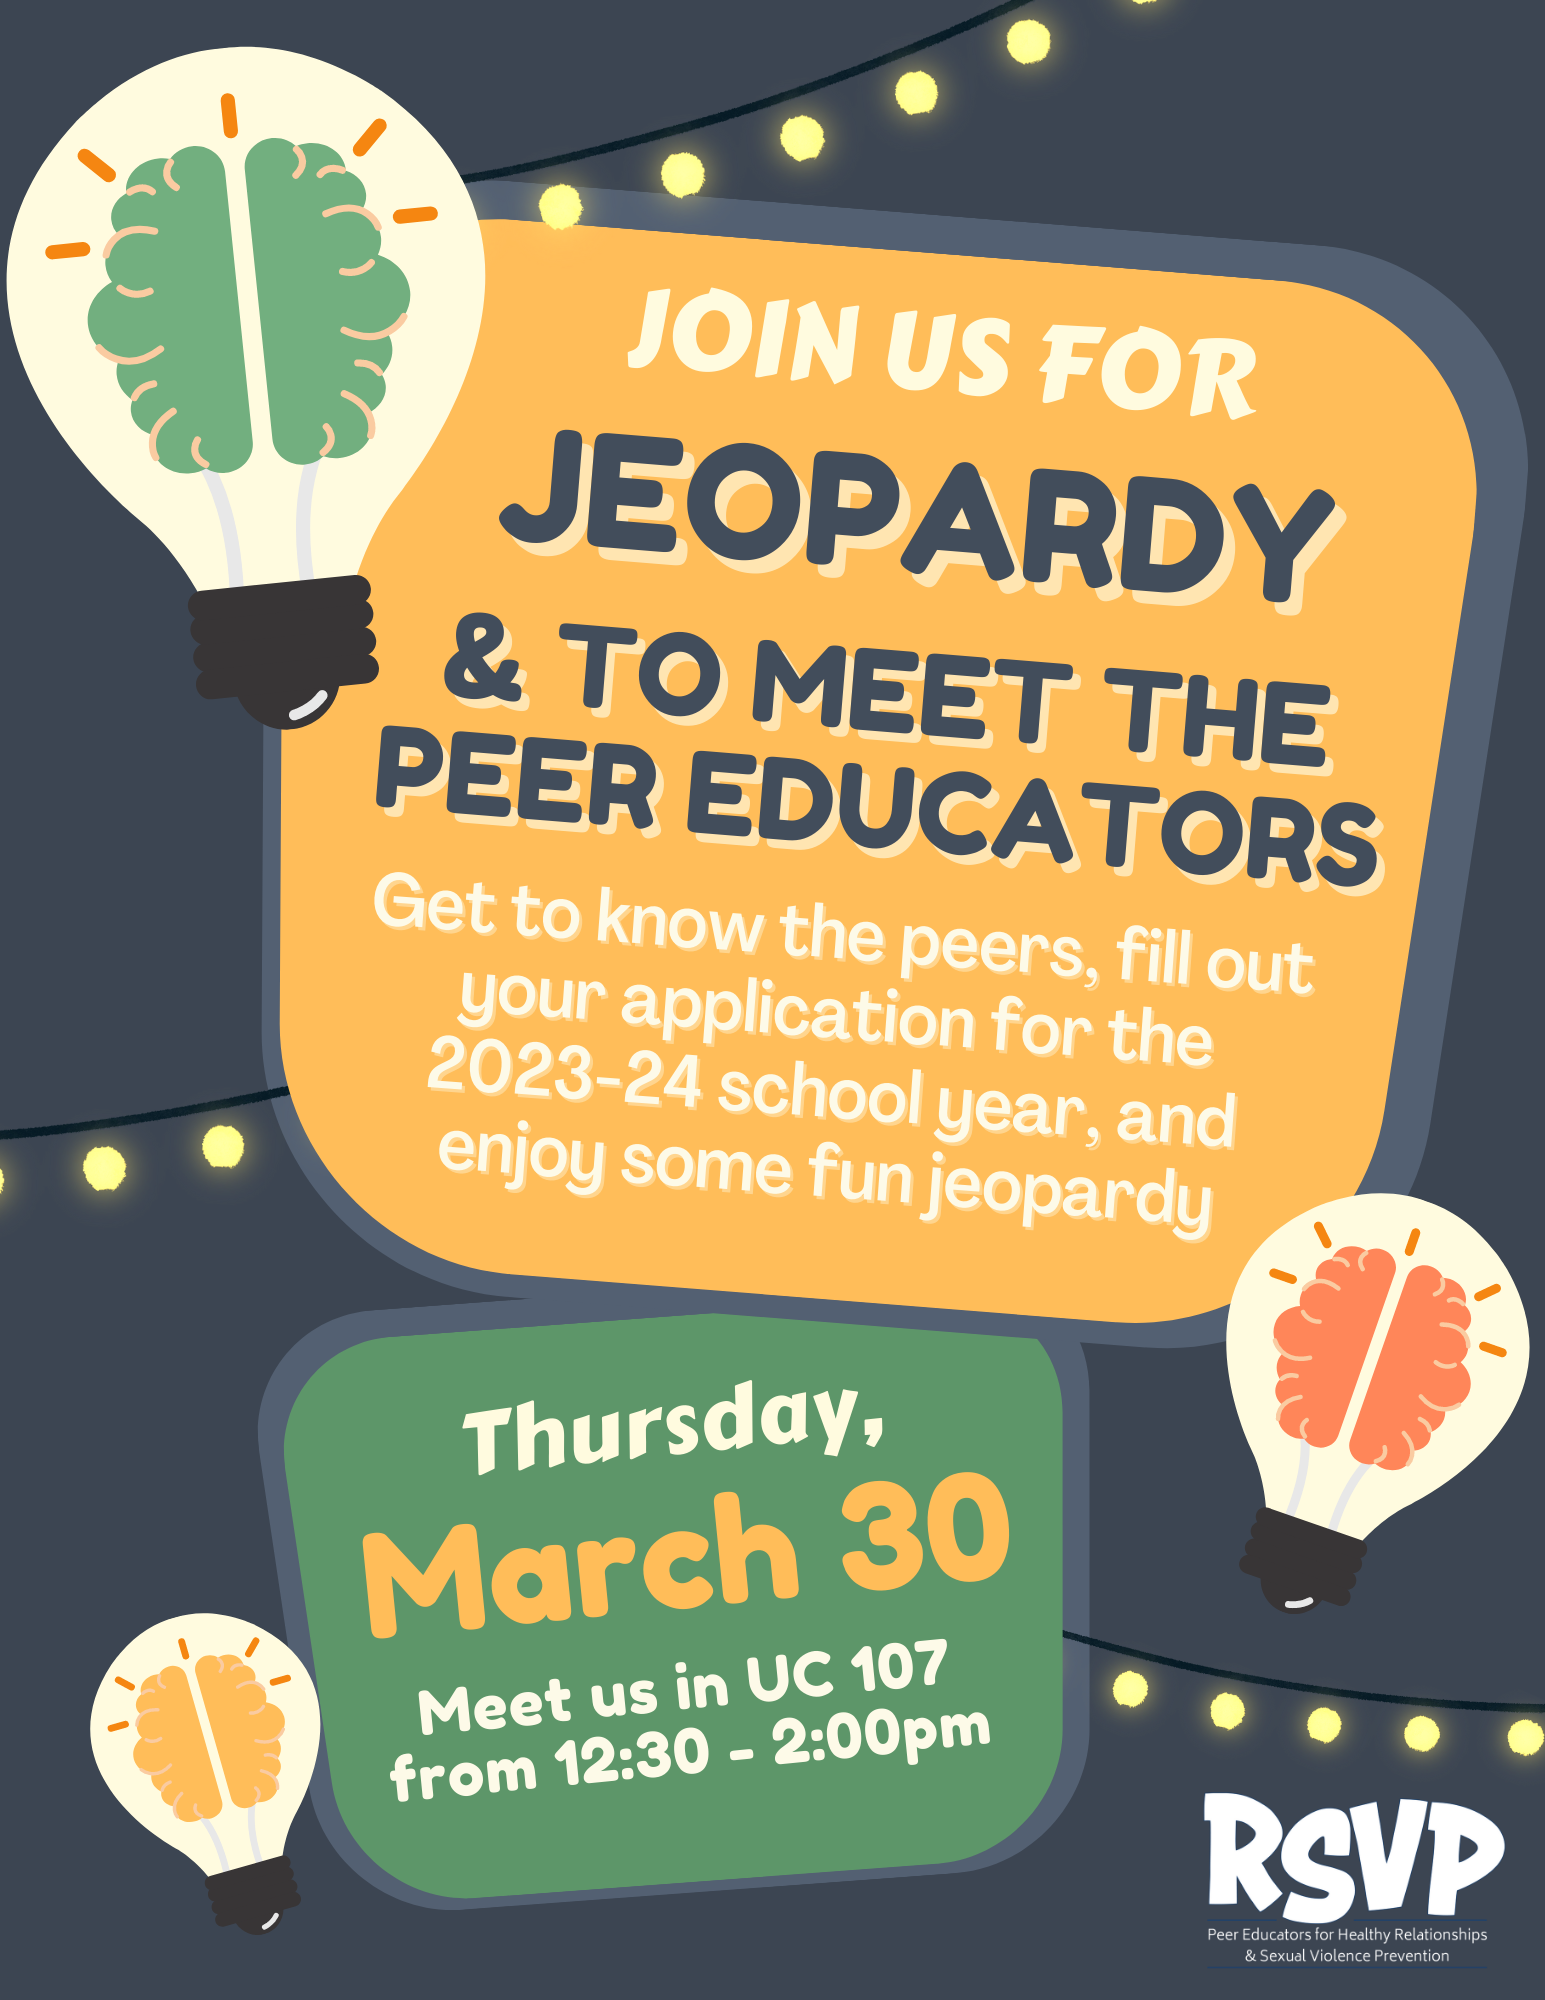 Dark gray background with the following text: "Join us for jeopardy & to meet the peer educators. Get to know the peers, fill out your application for the 2023-24 school year, and enjoy some fun jeopardy. Thursday, March 30; Meet us in UC 107 from 12:30 - 2:00pm"